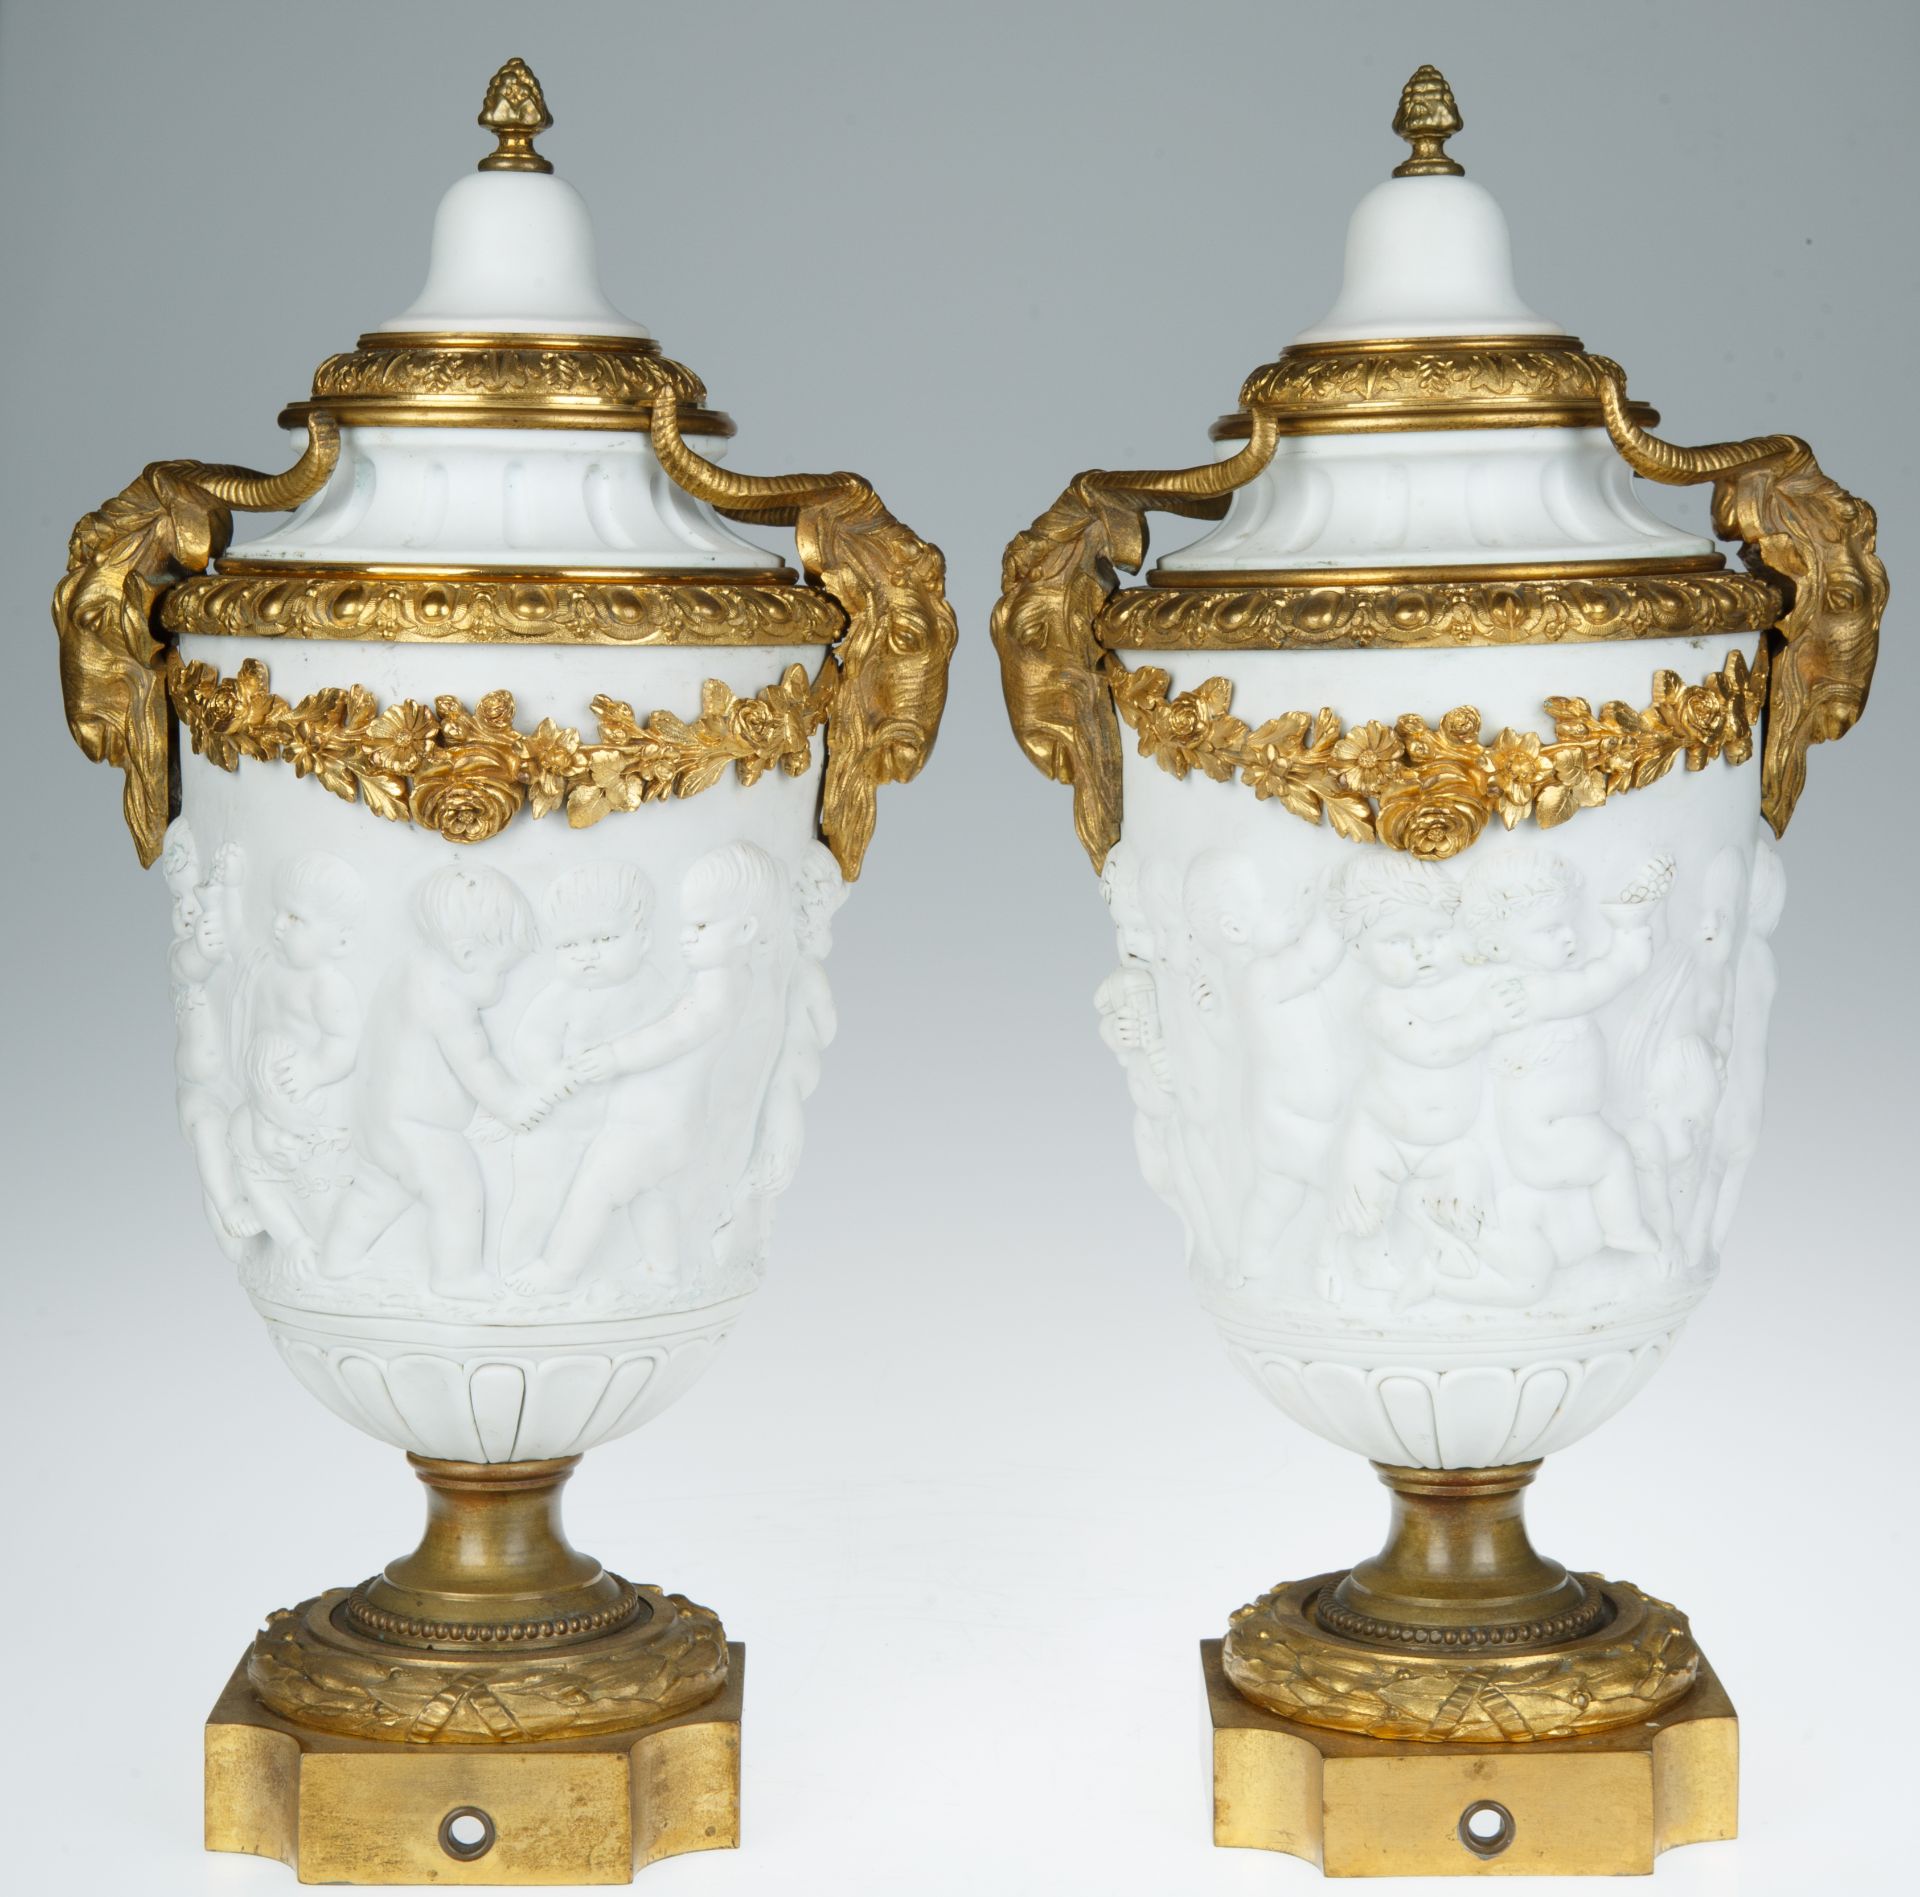 PAIR OF SEVRES VASES - Image 2 of 4